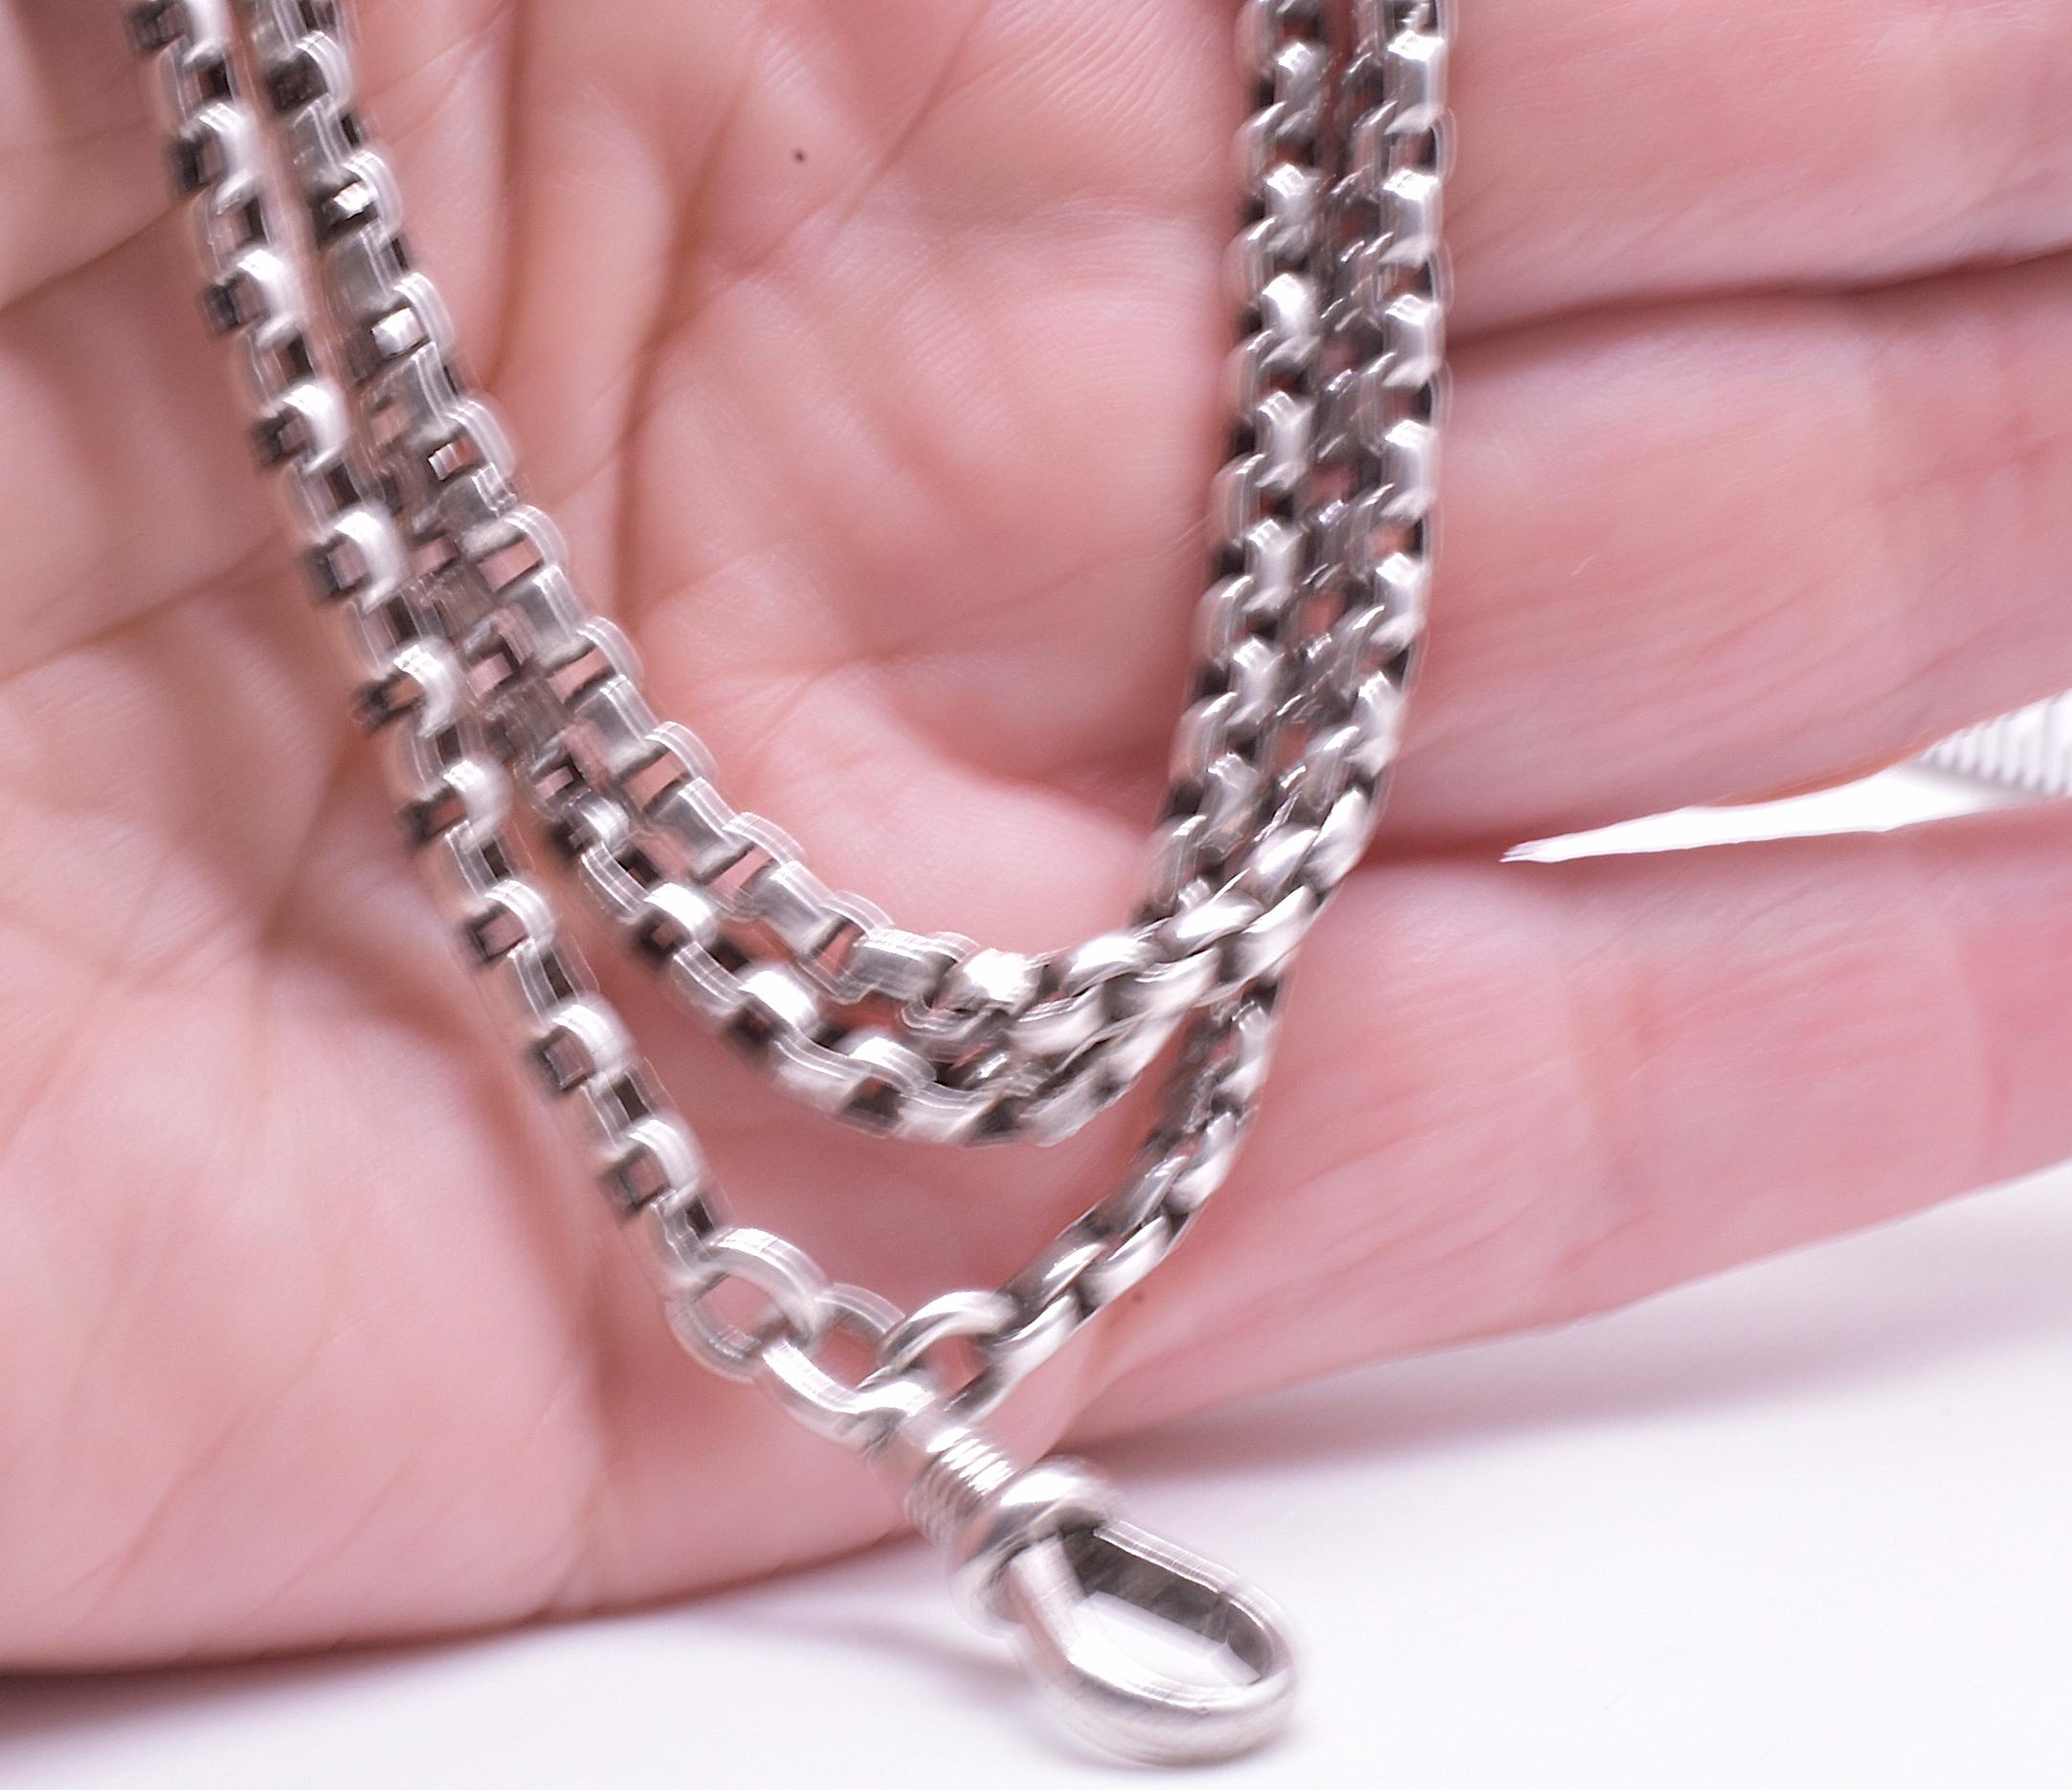 This is an original nineteenth century sterling watch chain with a substantial square shaped link called a Venetian or box link. Closeup photos reveal the interesting interlocking pattern of the links. A great deal of ingenuity went into making